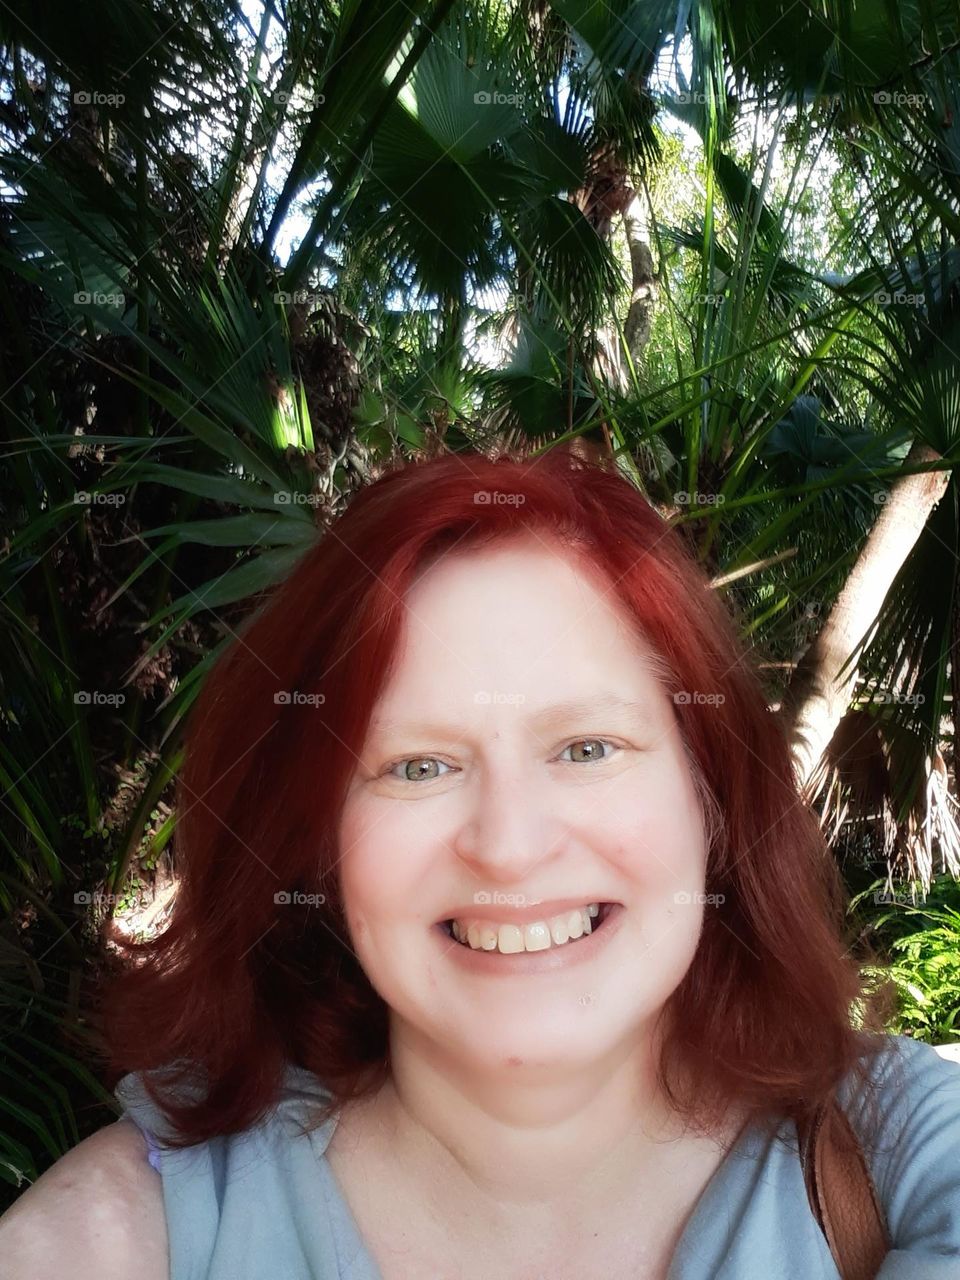 Selfie taken of myself a Caucasian woman with red hair, I am smiling and enjoying nature at Mead Botanical Gardens in Winter Park, Florida.